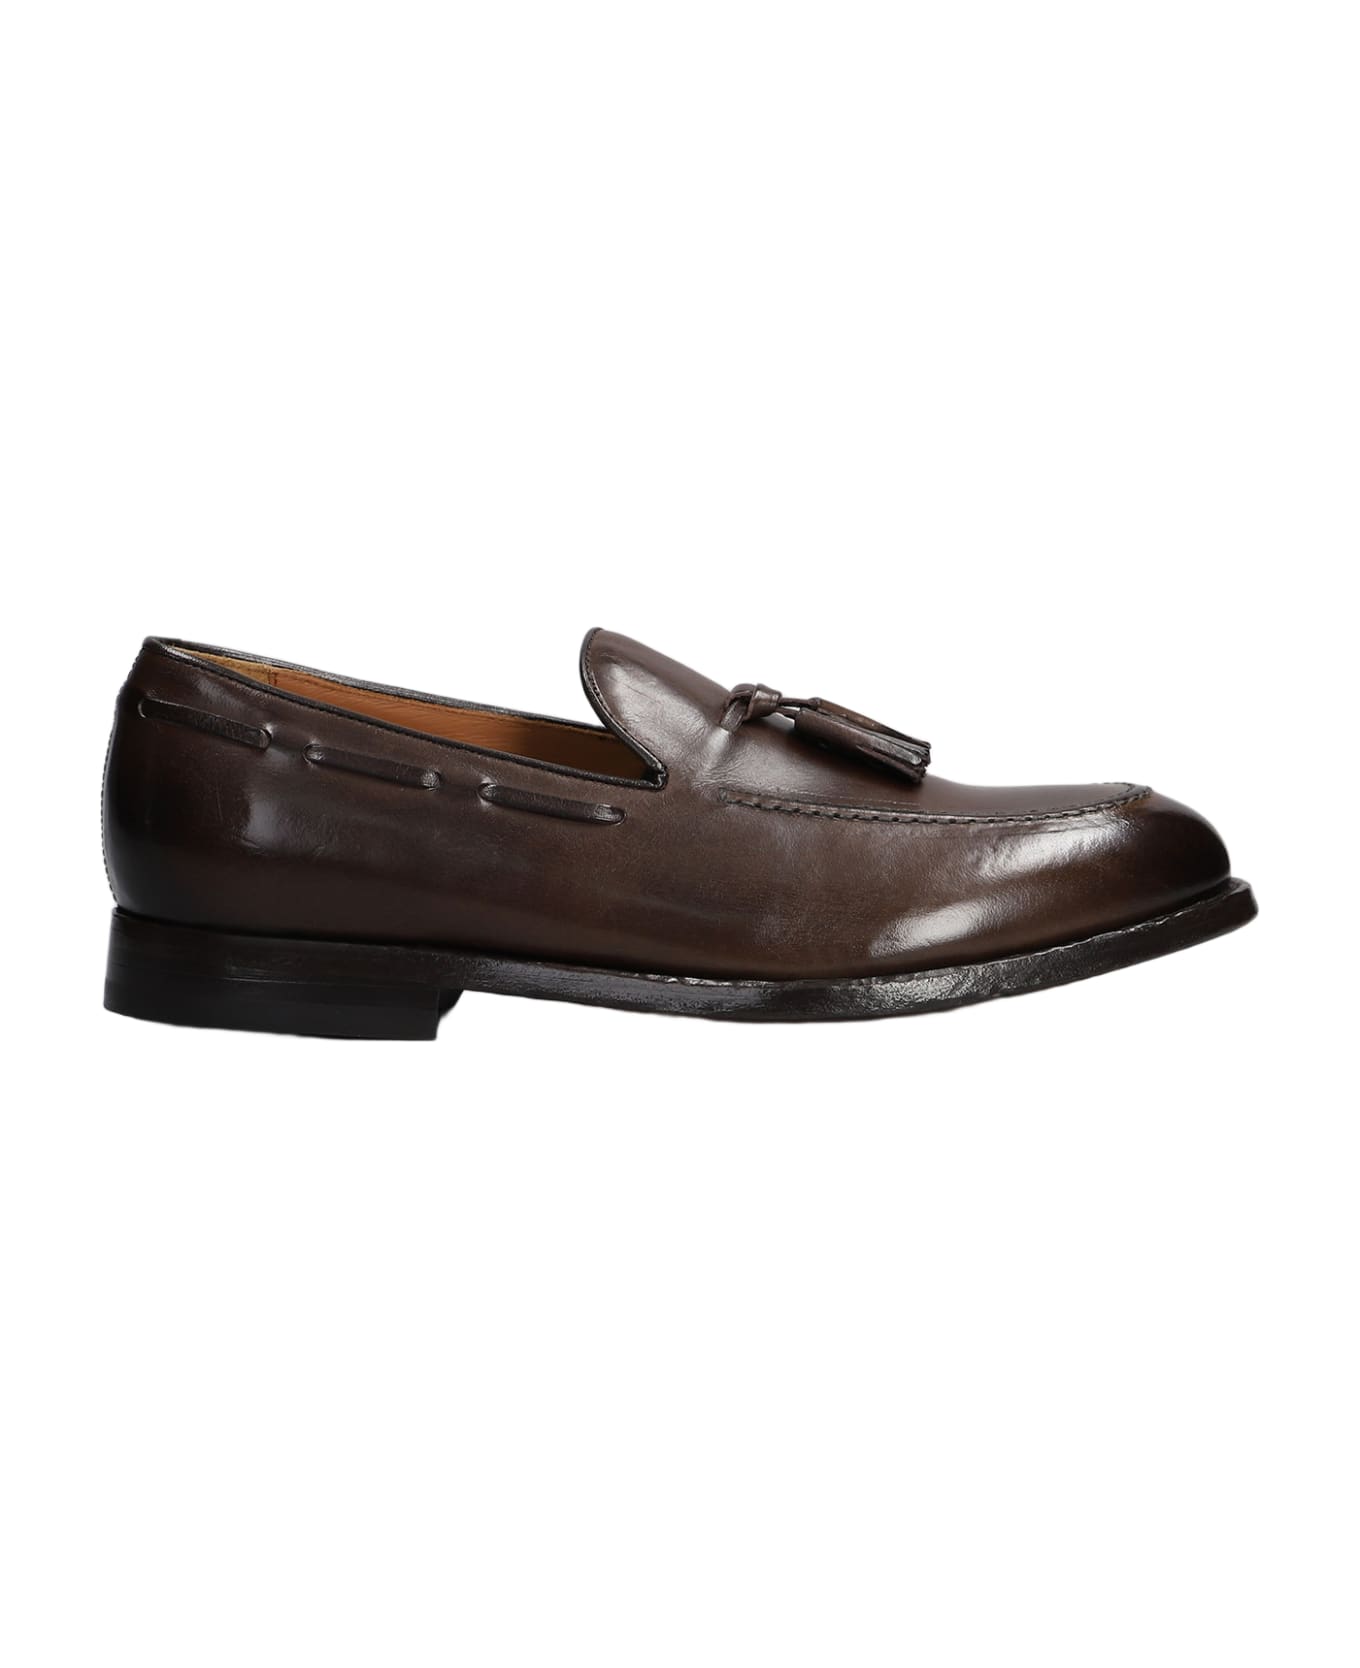 Green George Loafers In Leather Color Leather - leather color